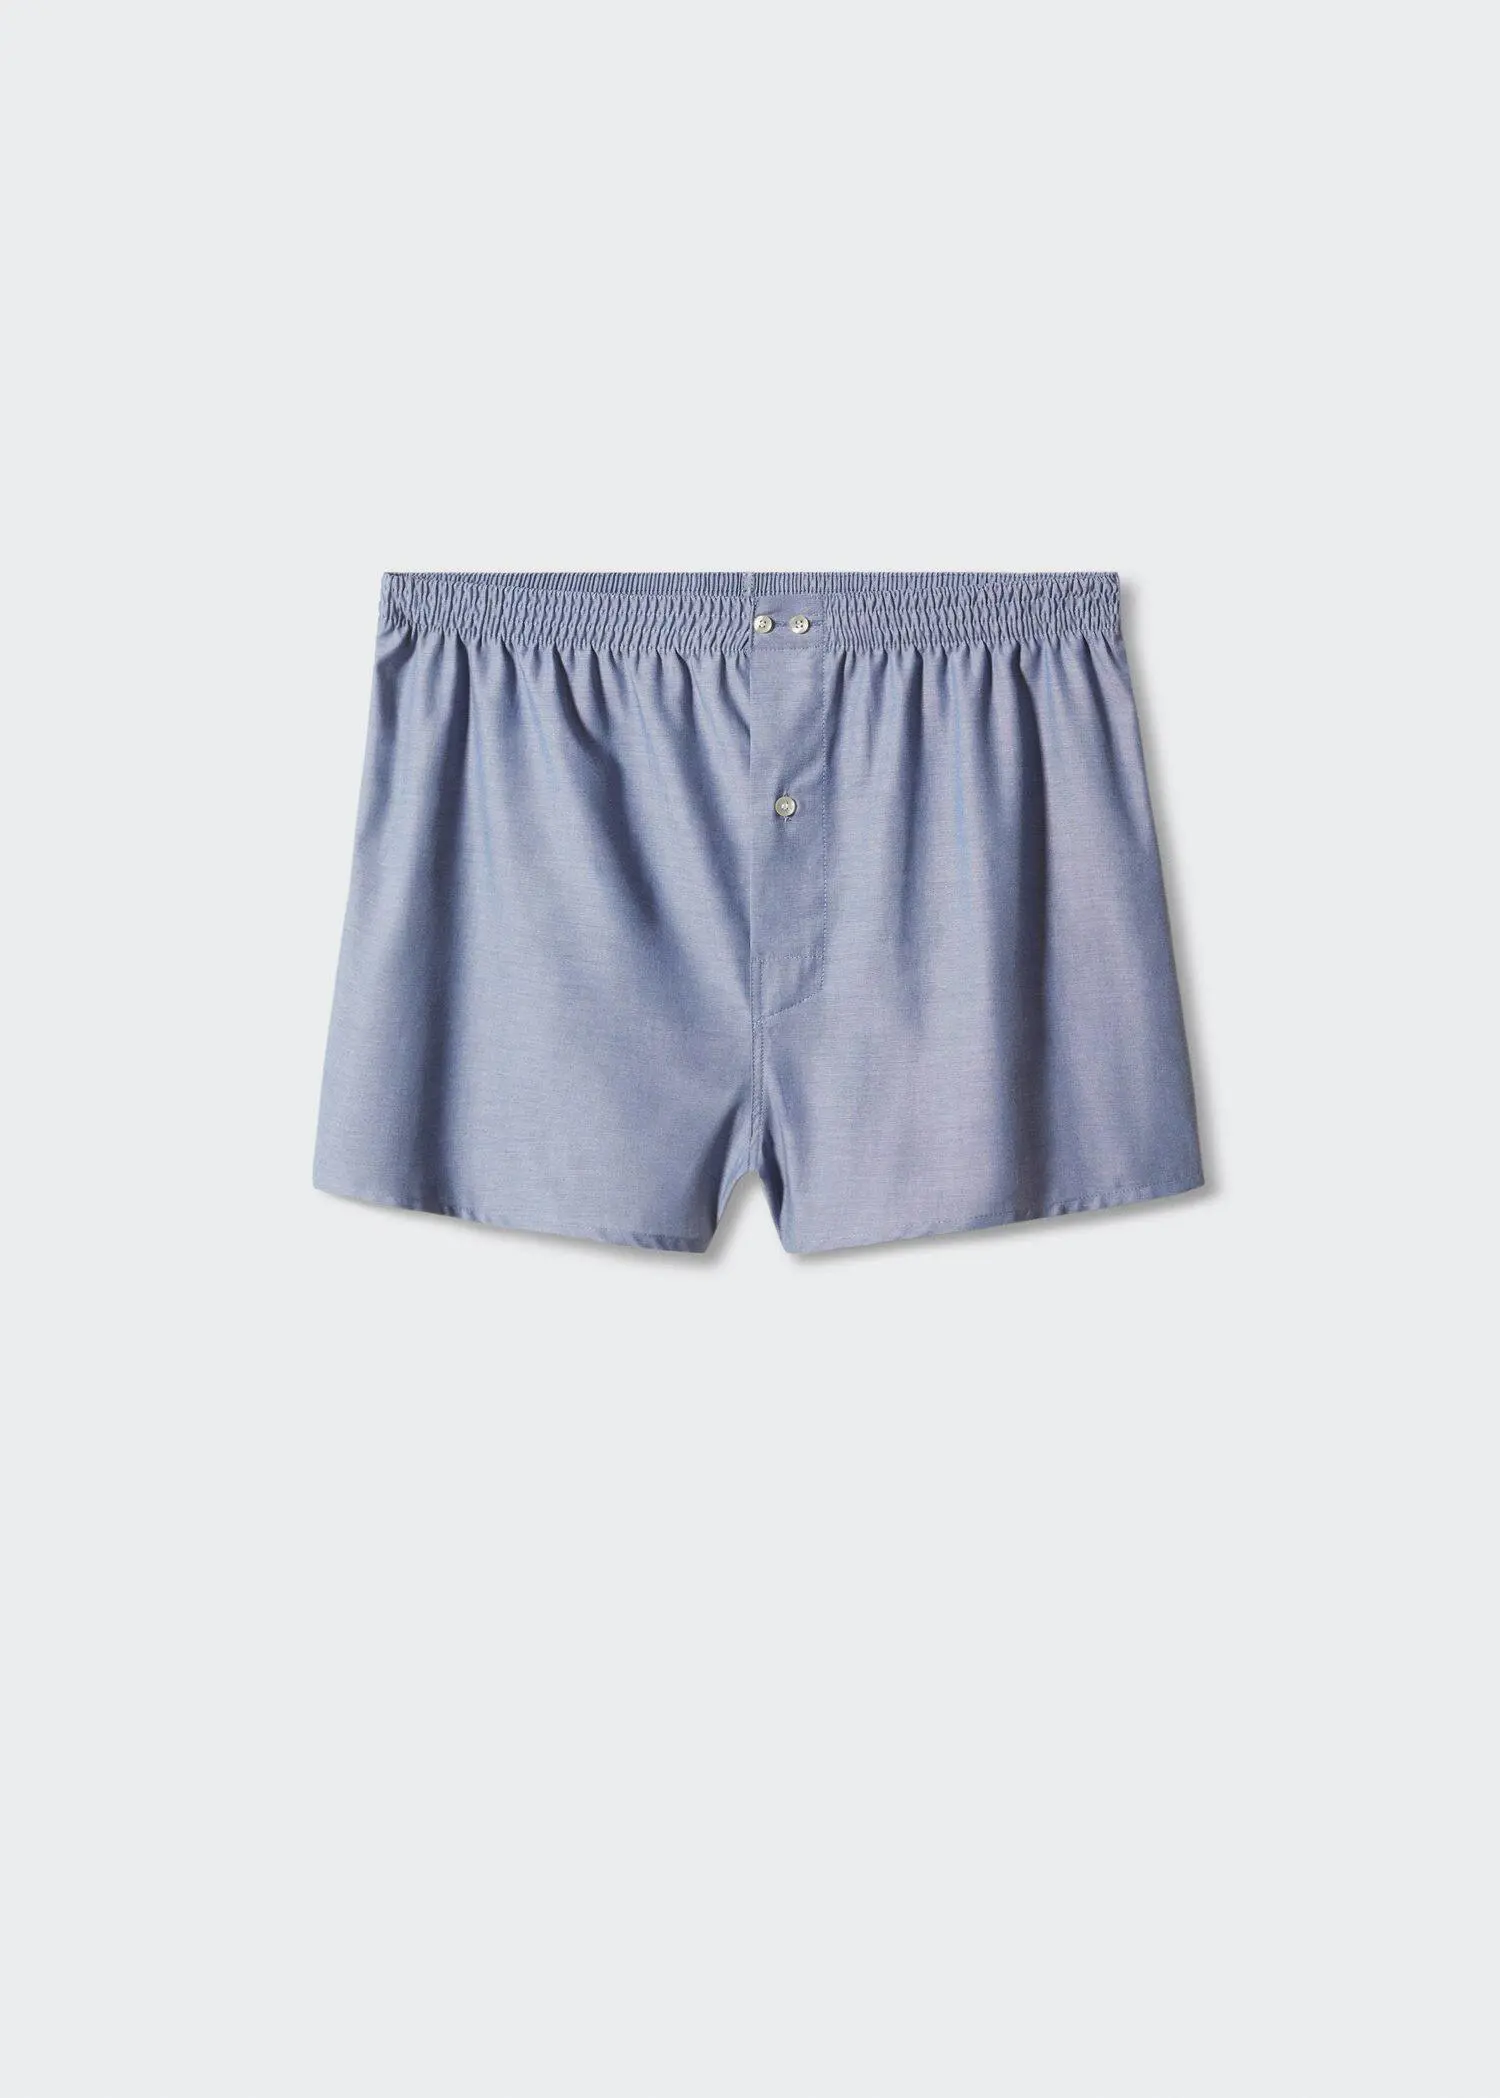 Mango 100% cotton plain briefs. a pair of blue boxers are on a white background. 